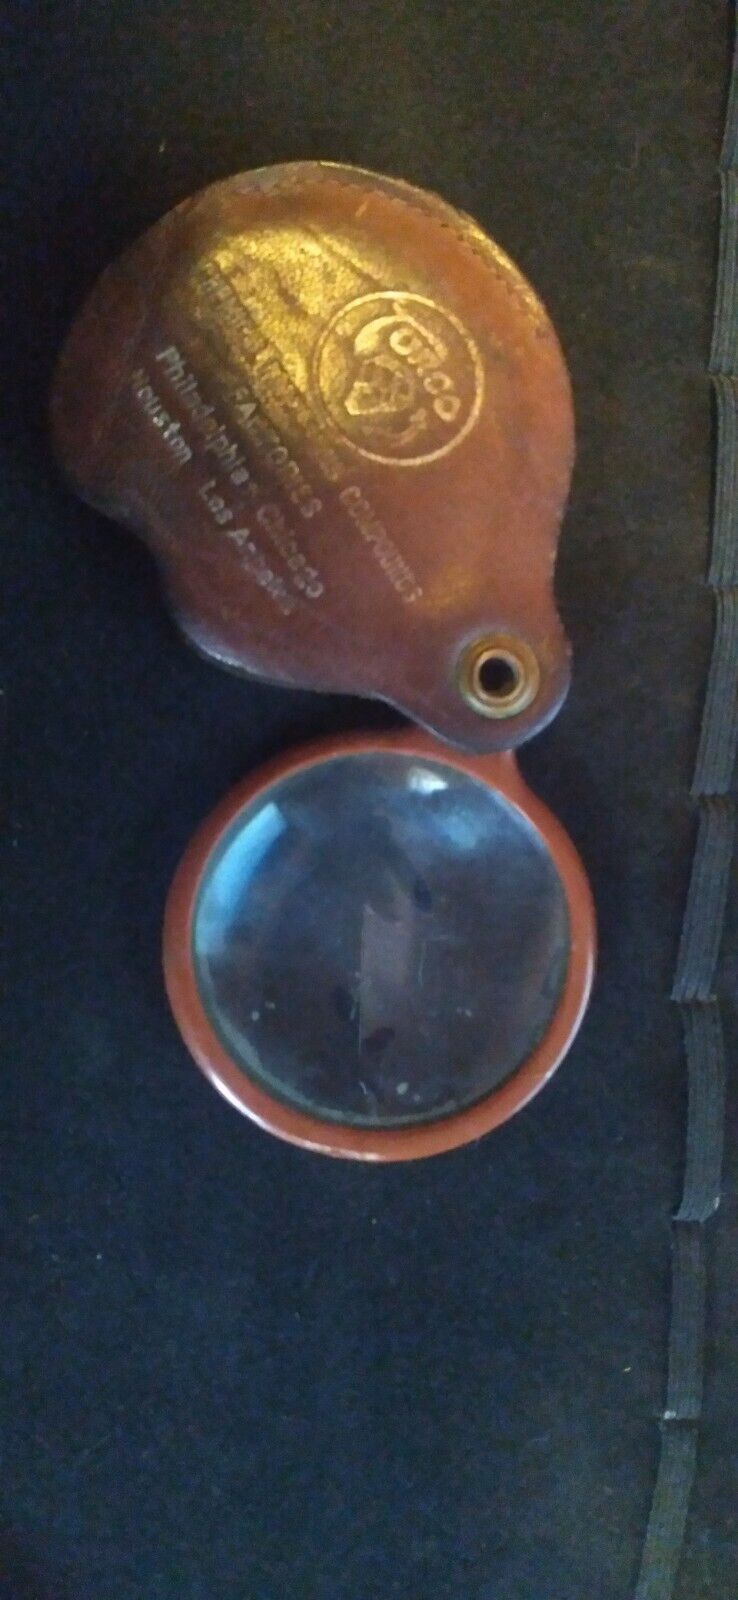 VINTAGE Turco chemical processingMAGNIFYING GLASS IN LEATHER CASE  PROMOS